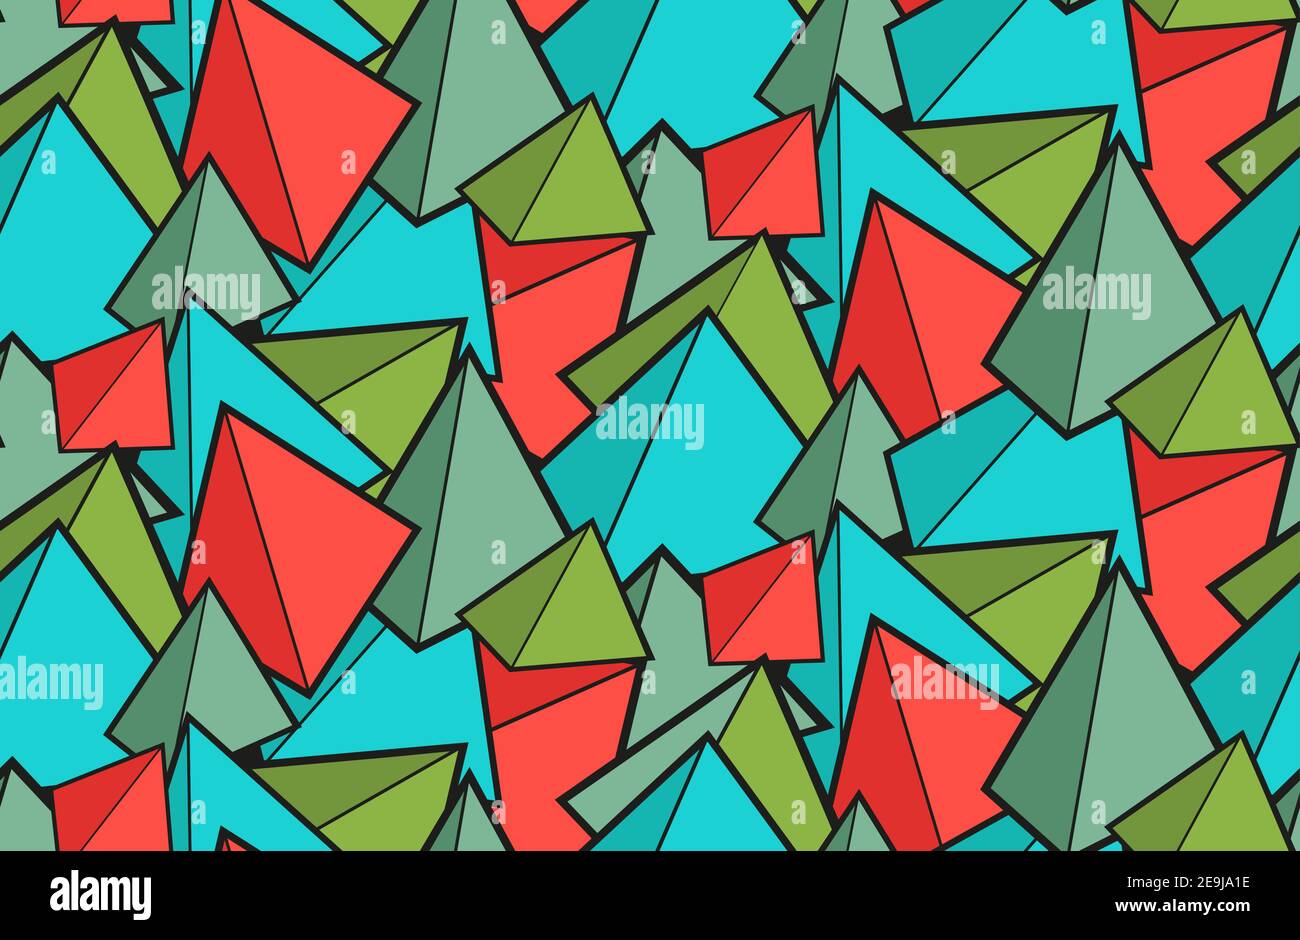 Seamless geometric pattern from multicolored pyramids. Childrens wallpaper from prisms. Fabric made of red and green cones. Texture for wrapping fabri Stock Vector